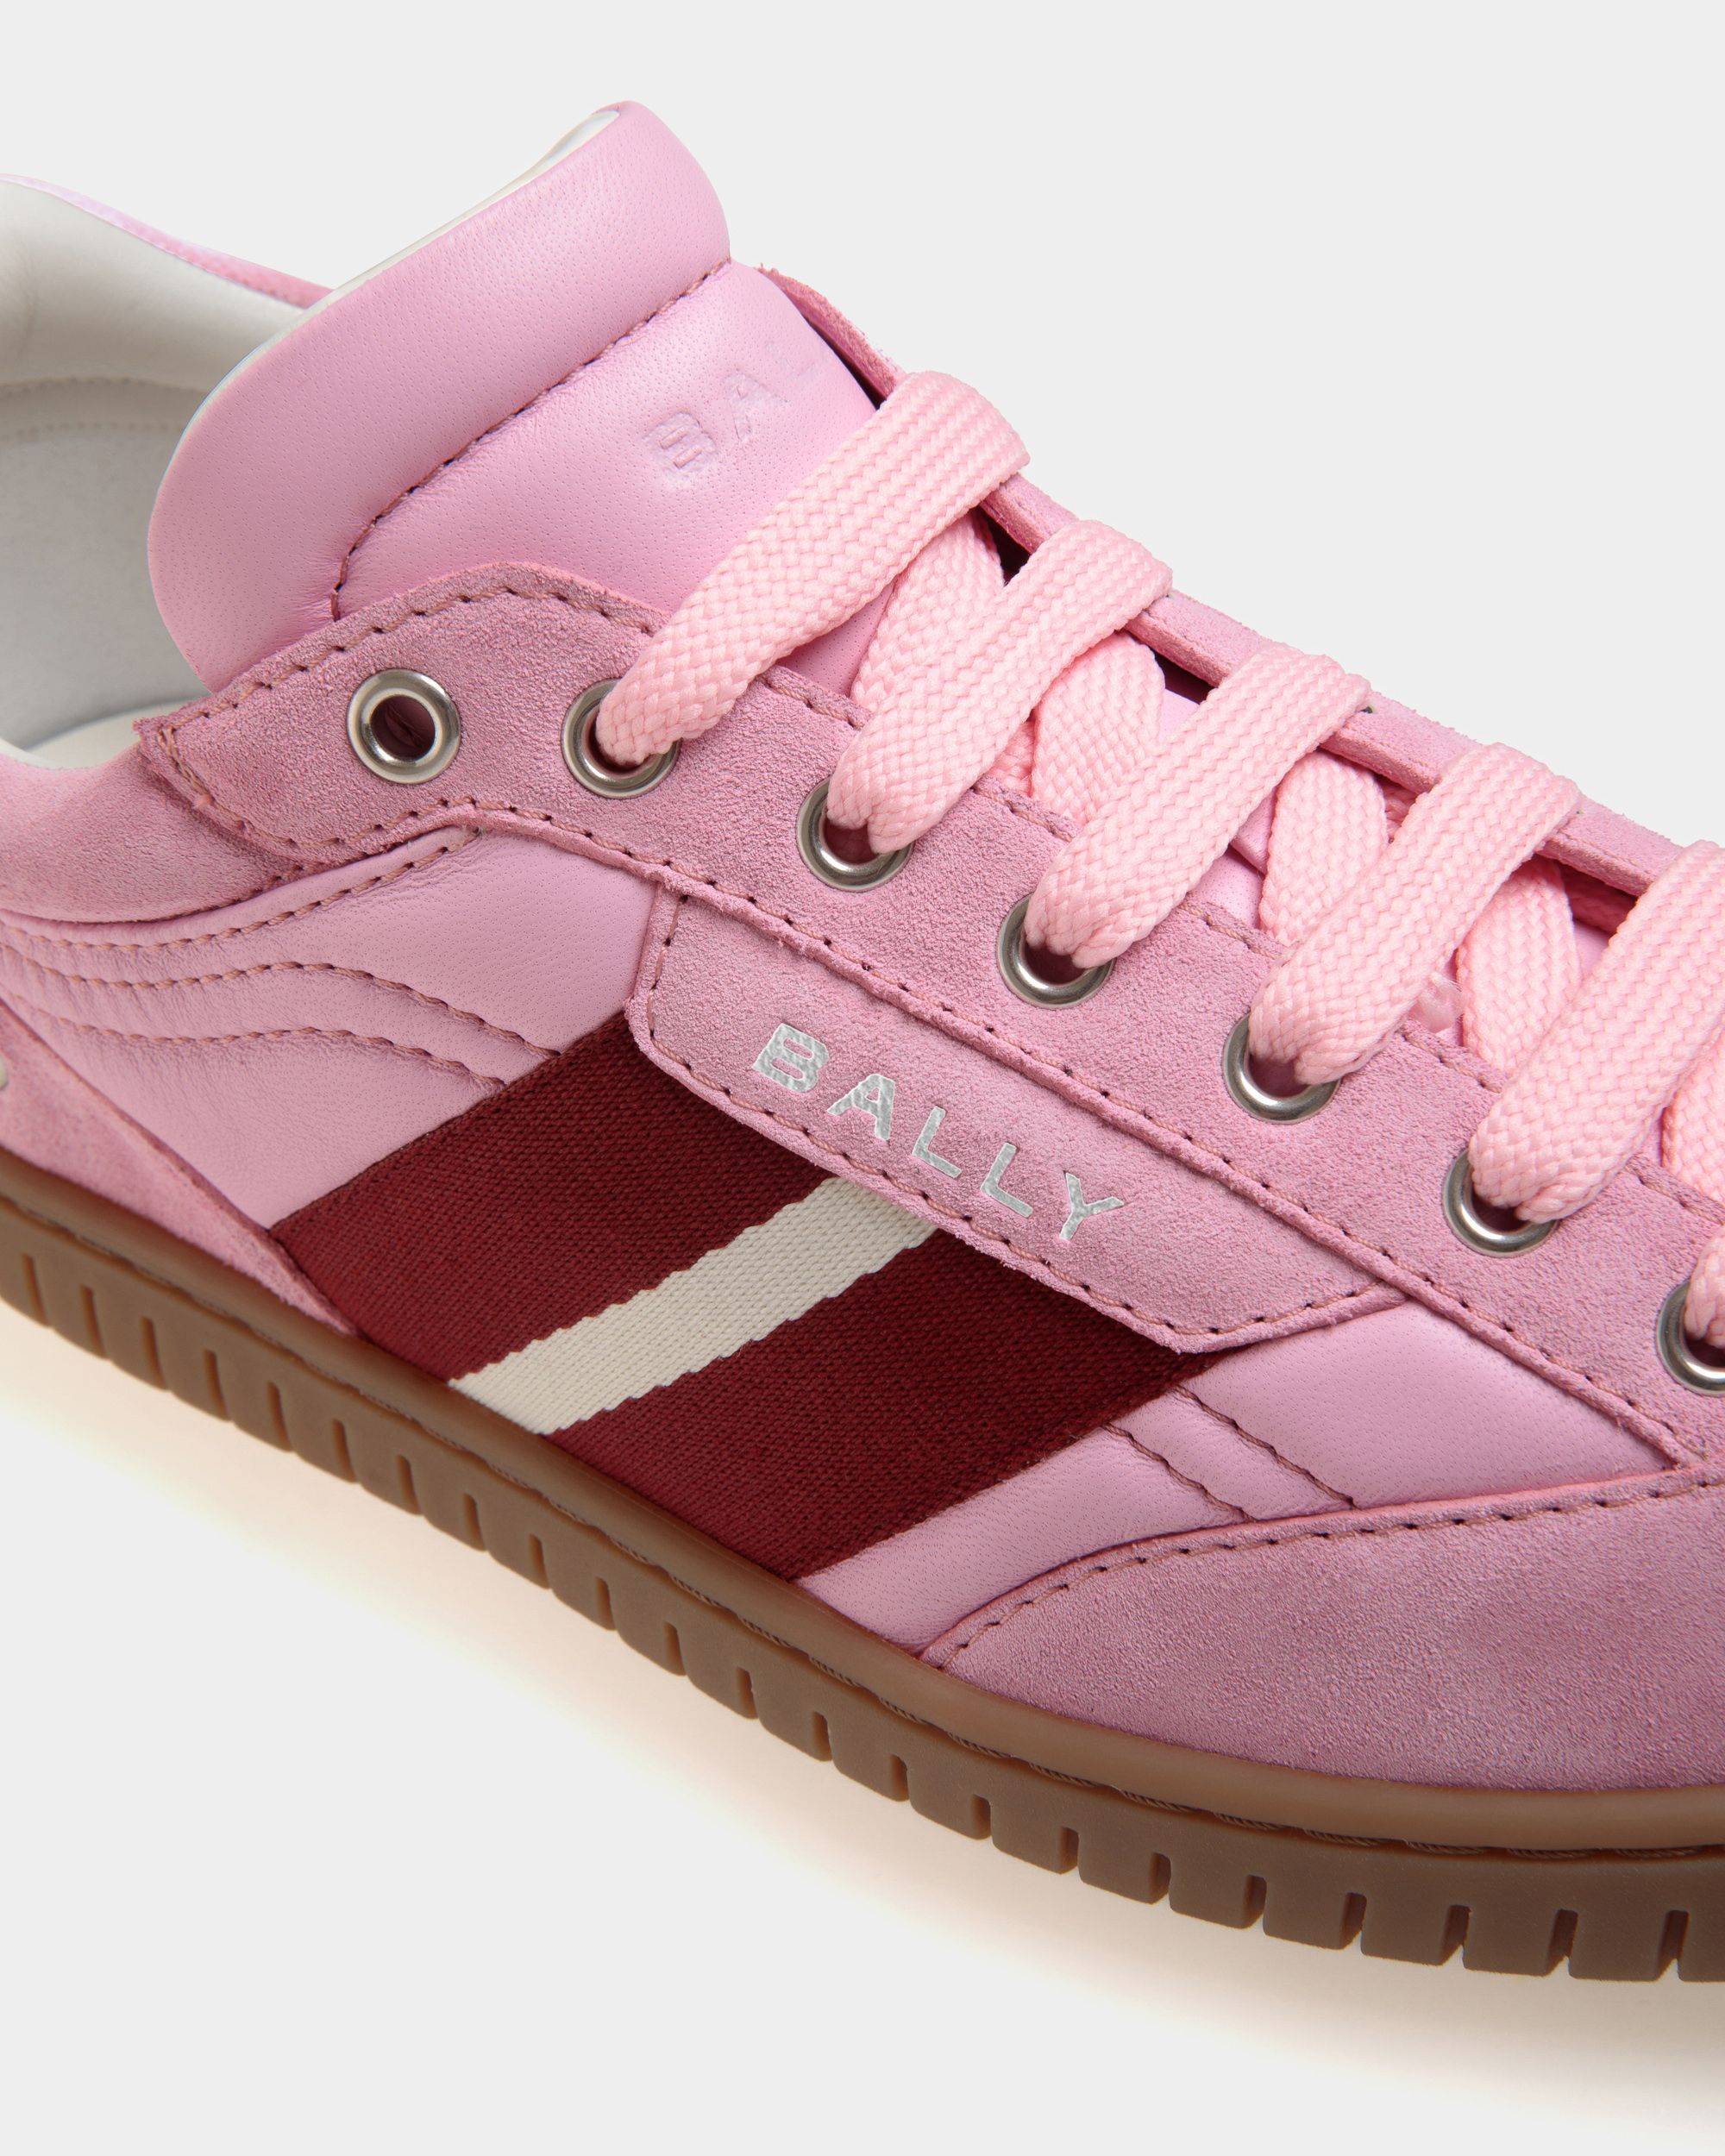 Player | Women's Sneaker in Pink Leather and Suede | Bally | Still Life Detail